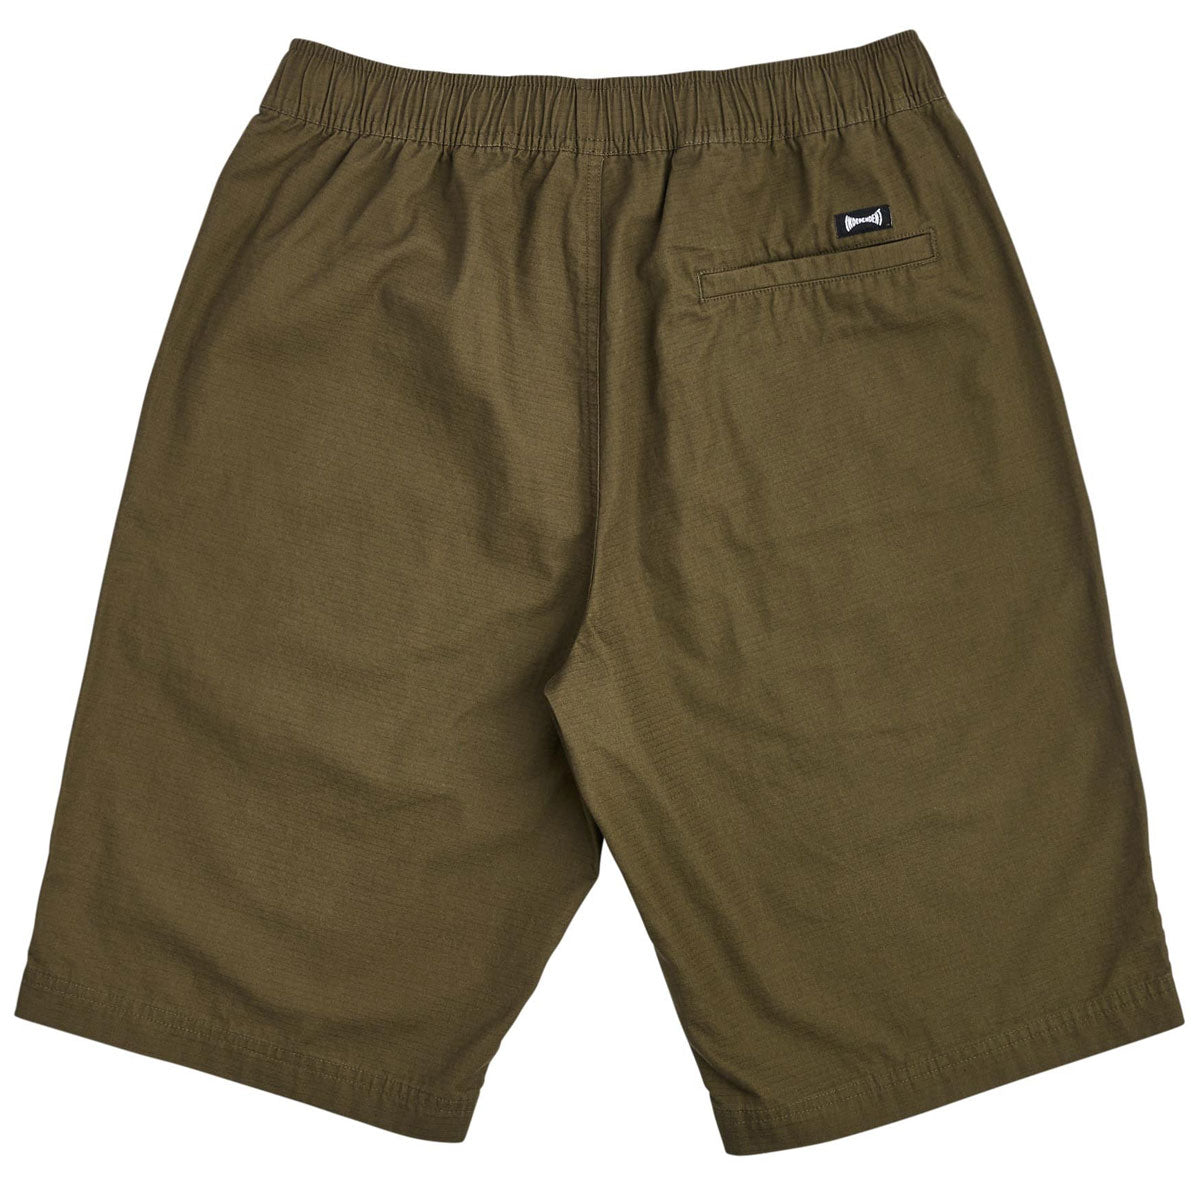 Independent Span Pull On Shorts - Chocolate image 2